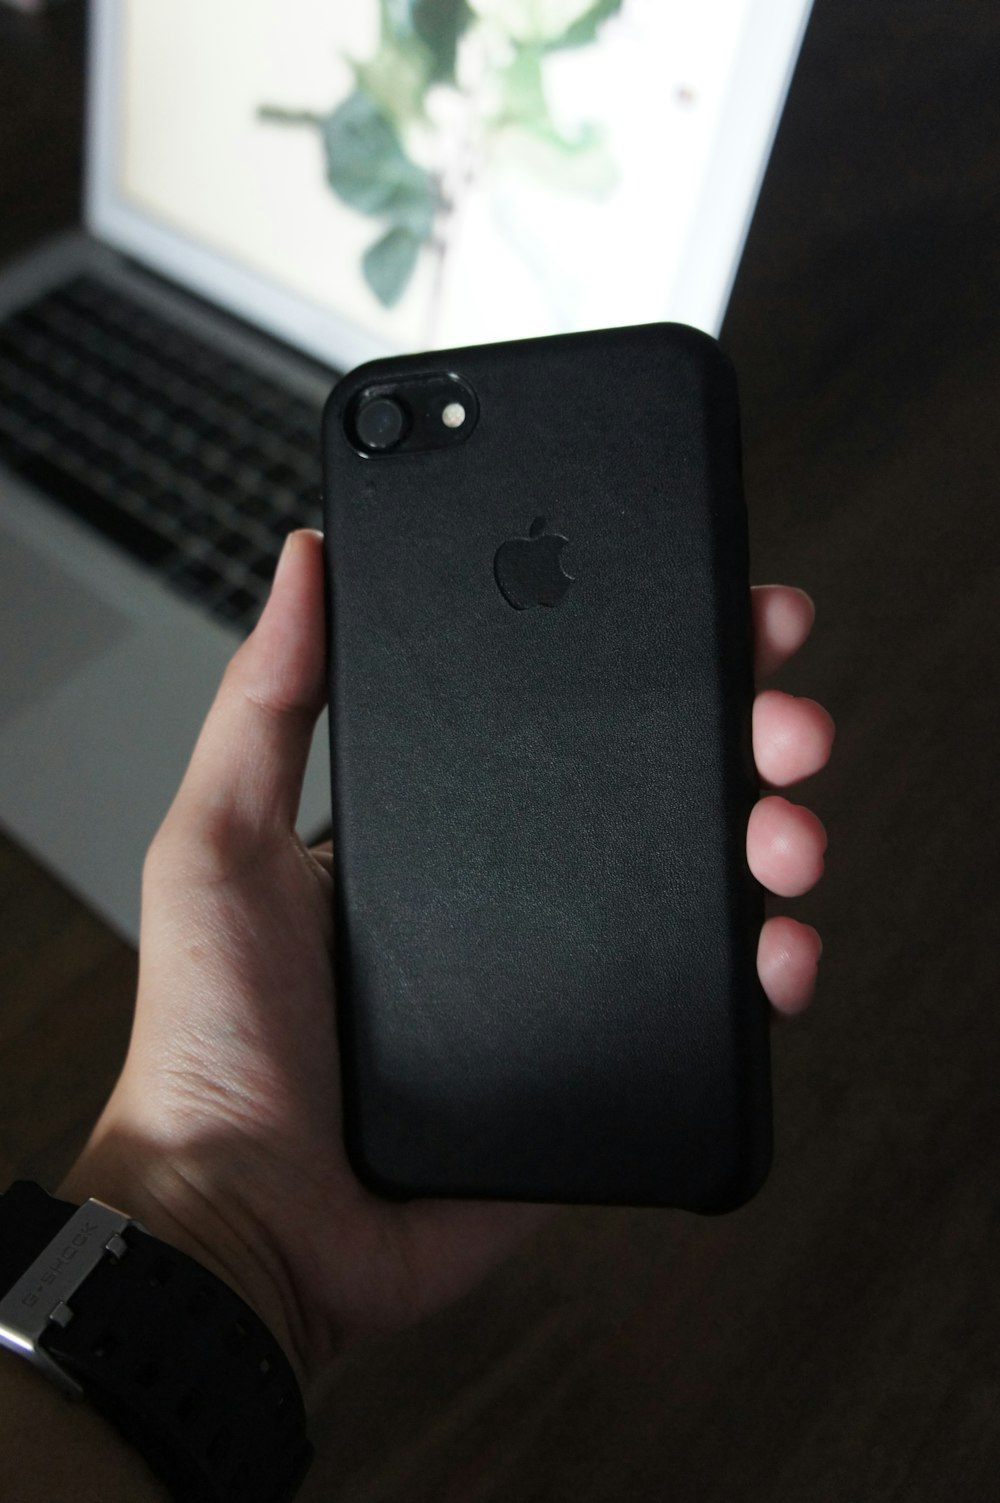 person holding black iphone 7